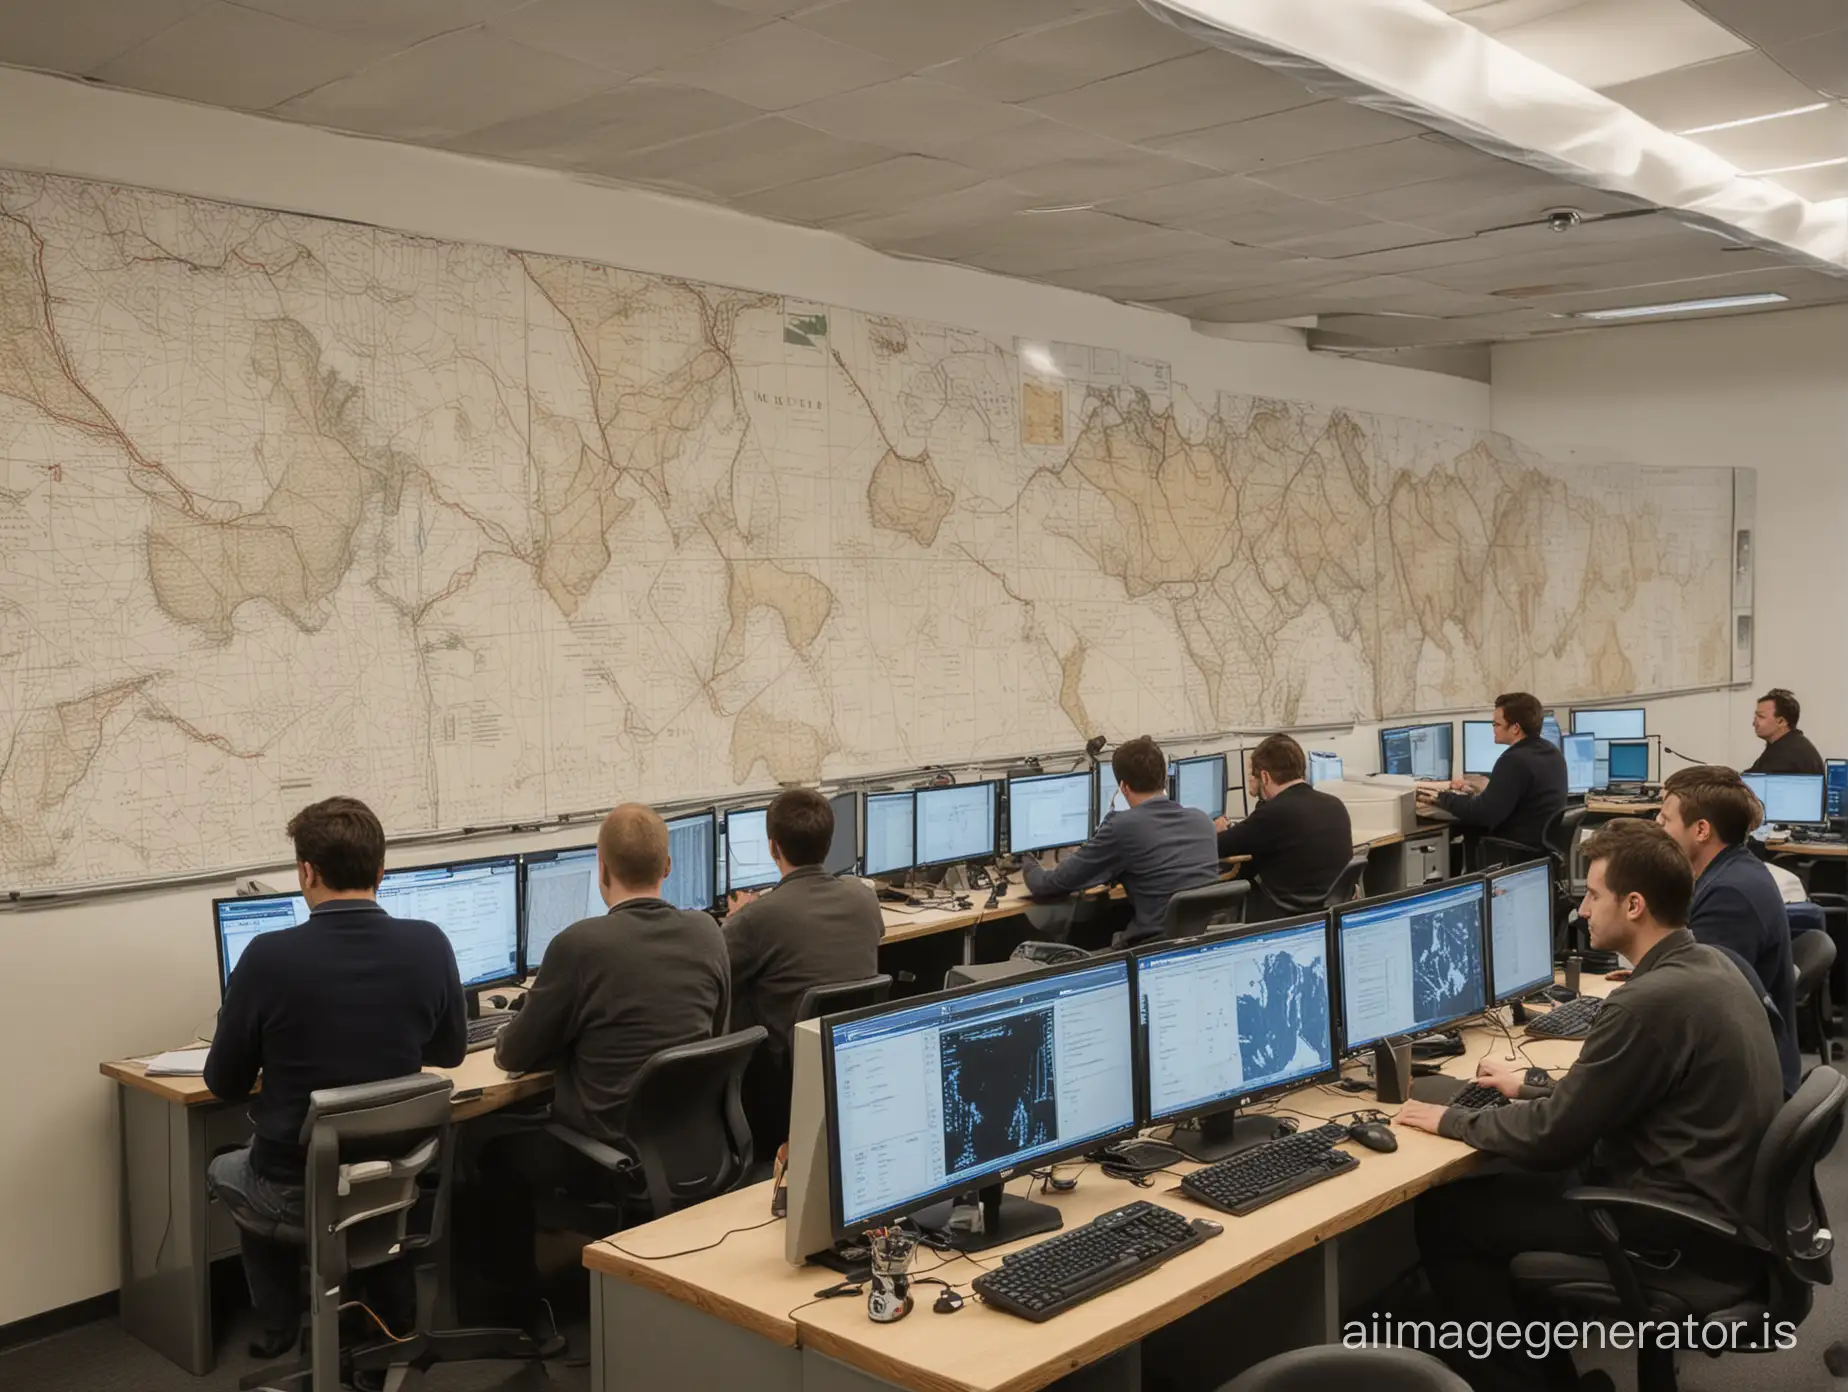 Ten men sit at computers, while on the walls hang diagrams, charts, and geographical maps.